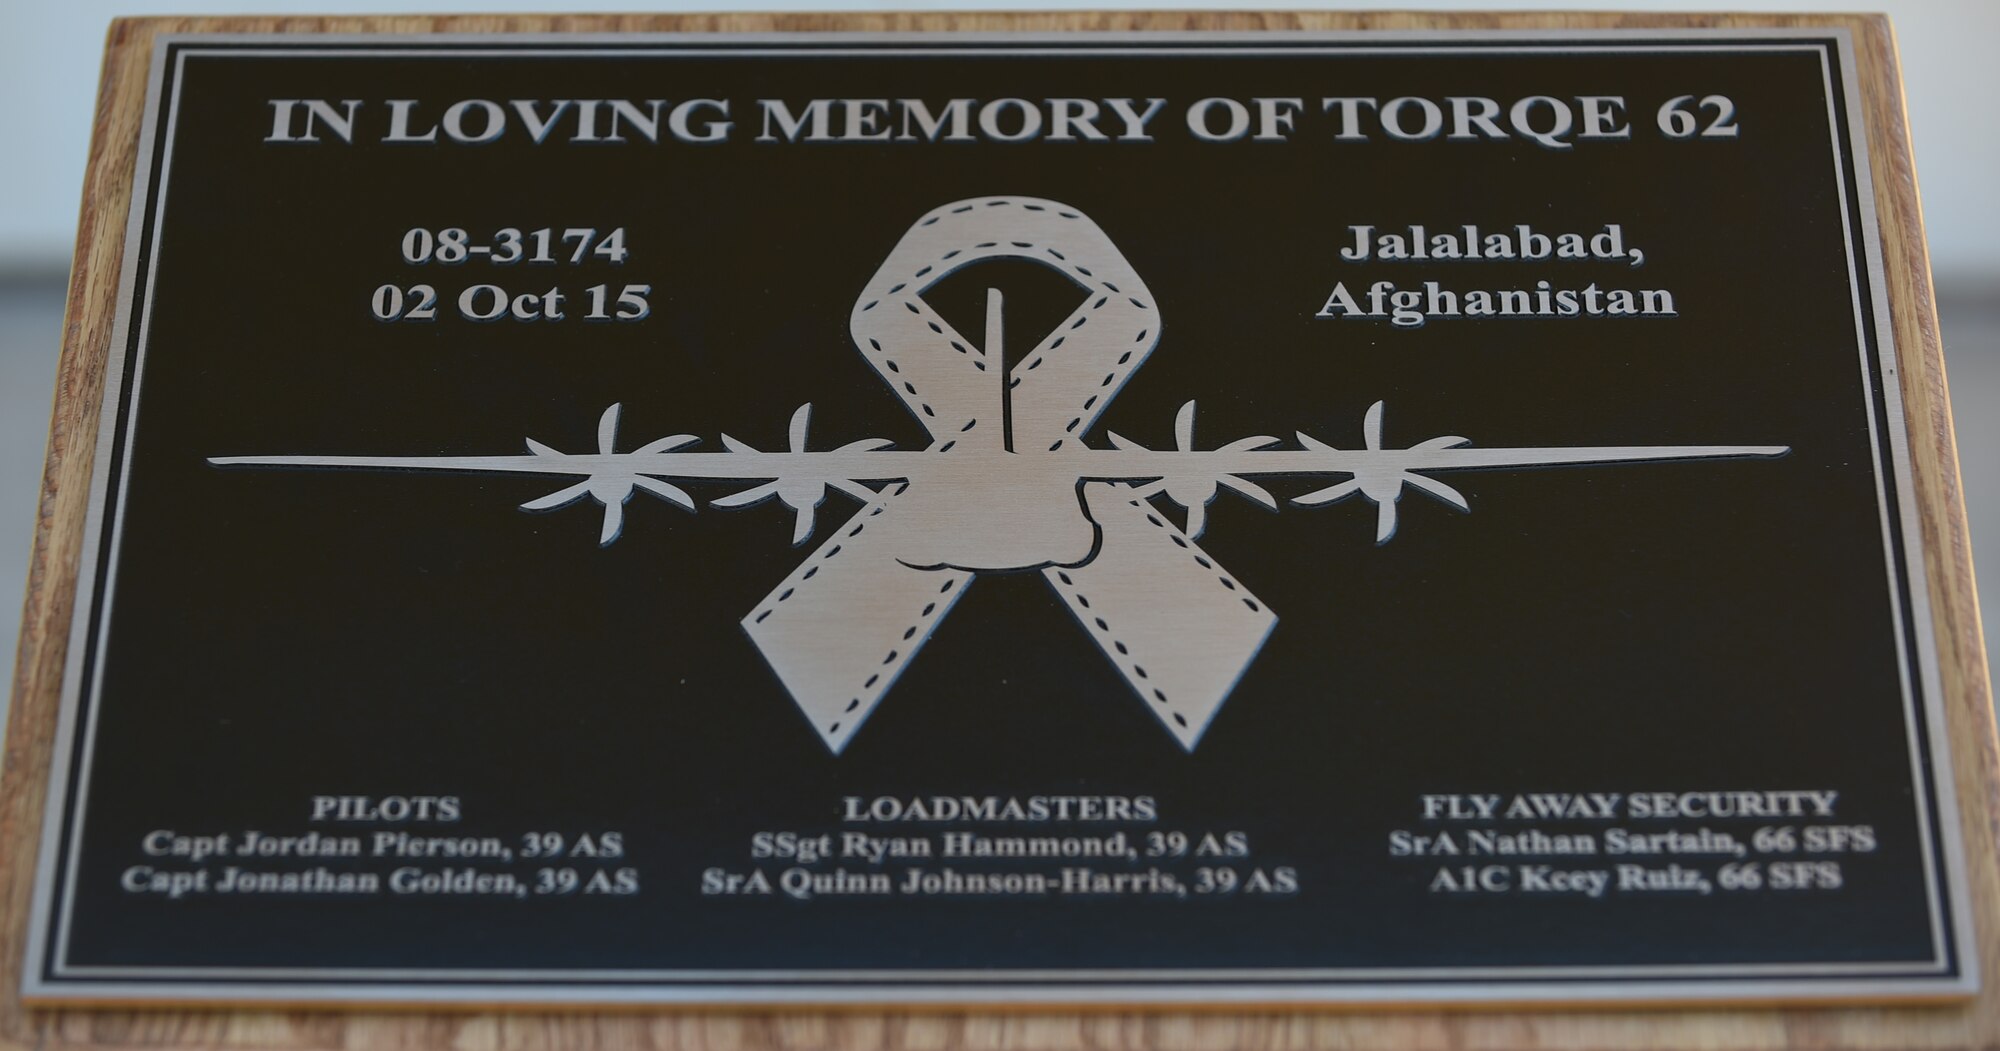 A plaque memorializing the Airmen of TORQE 62 was unveiled at Dyess Air Force Base, Texas, Sept. 30, 2016. The plaque is scheduled to be added to the Dyess Memorial Park upon its completion. (U.S. Air Force photo by Airman 1st Class Quay Drawdy)